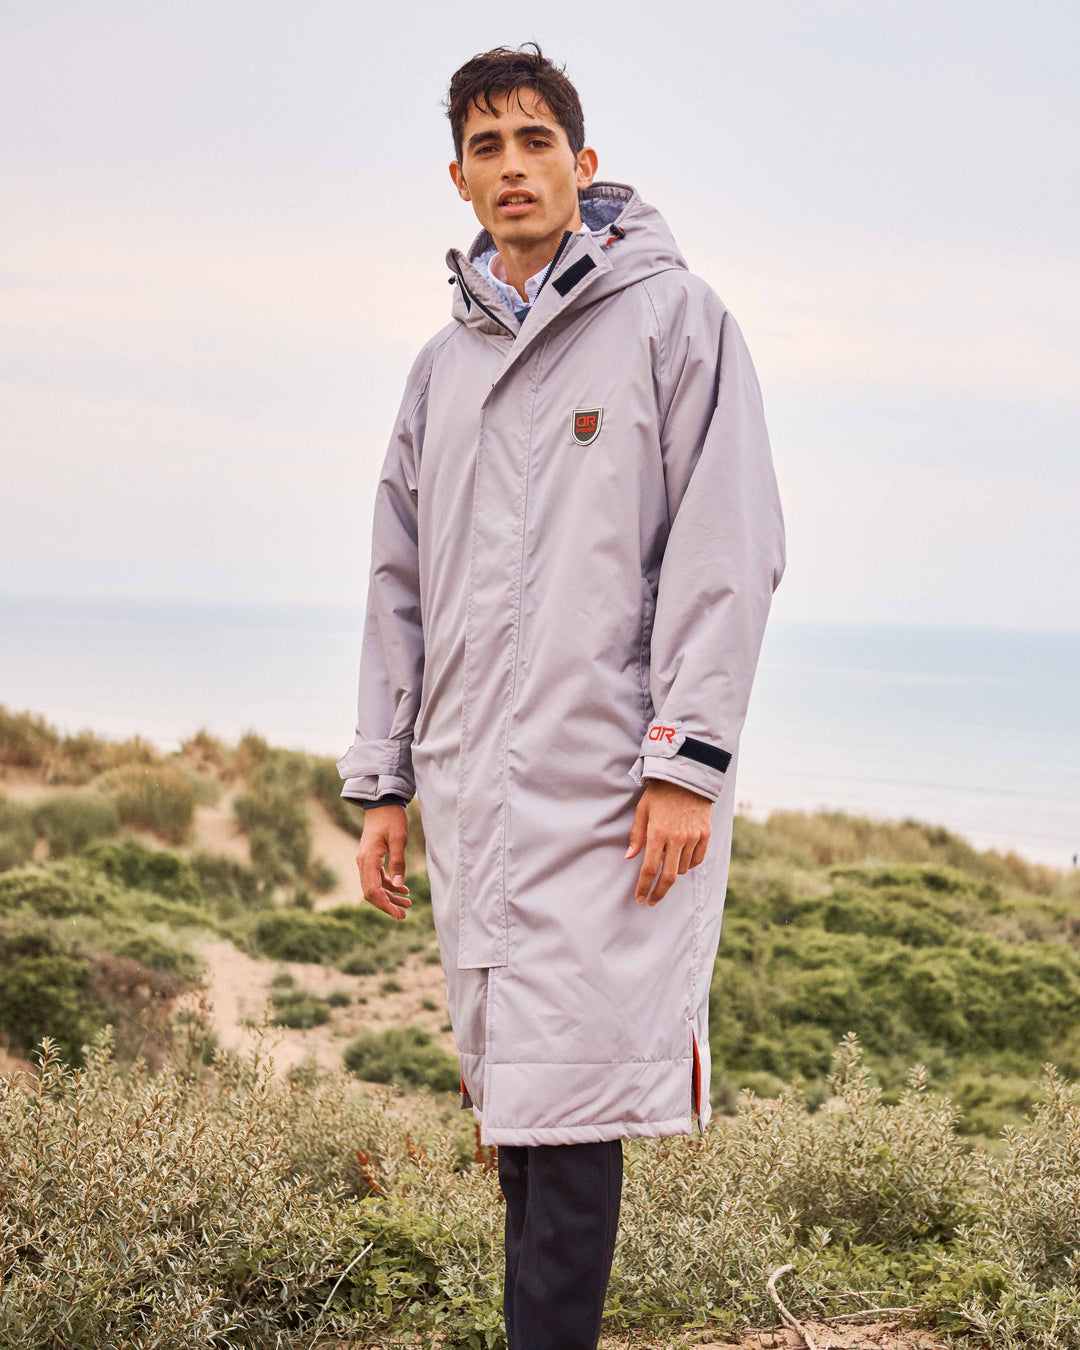  A man wearing a zipped-up dry-robe by D-Robe at Devon Beach. This robe features tapered seams to make it waterproof. These hooded unisex changing robes are made from recycled materials, with a waterproof outer, fleece-lined inner, waterproof pockets, adjustable hood and cuffs. It is perfect for a stroll on the beach on a Spring day.